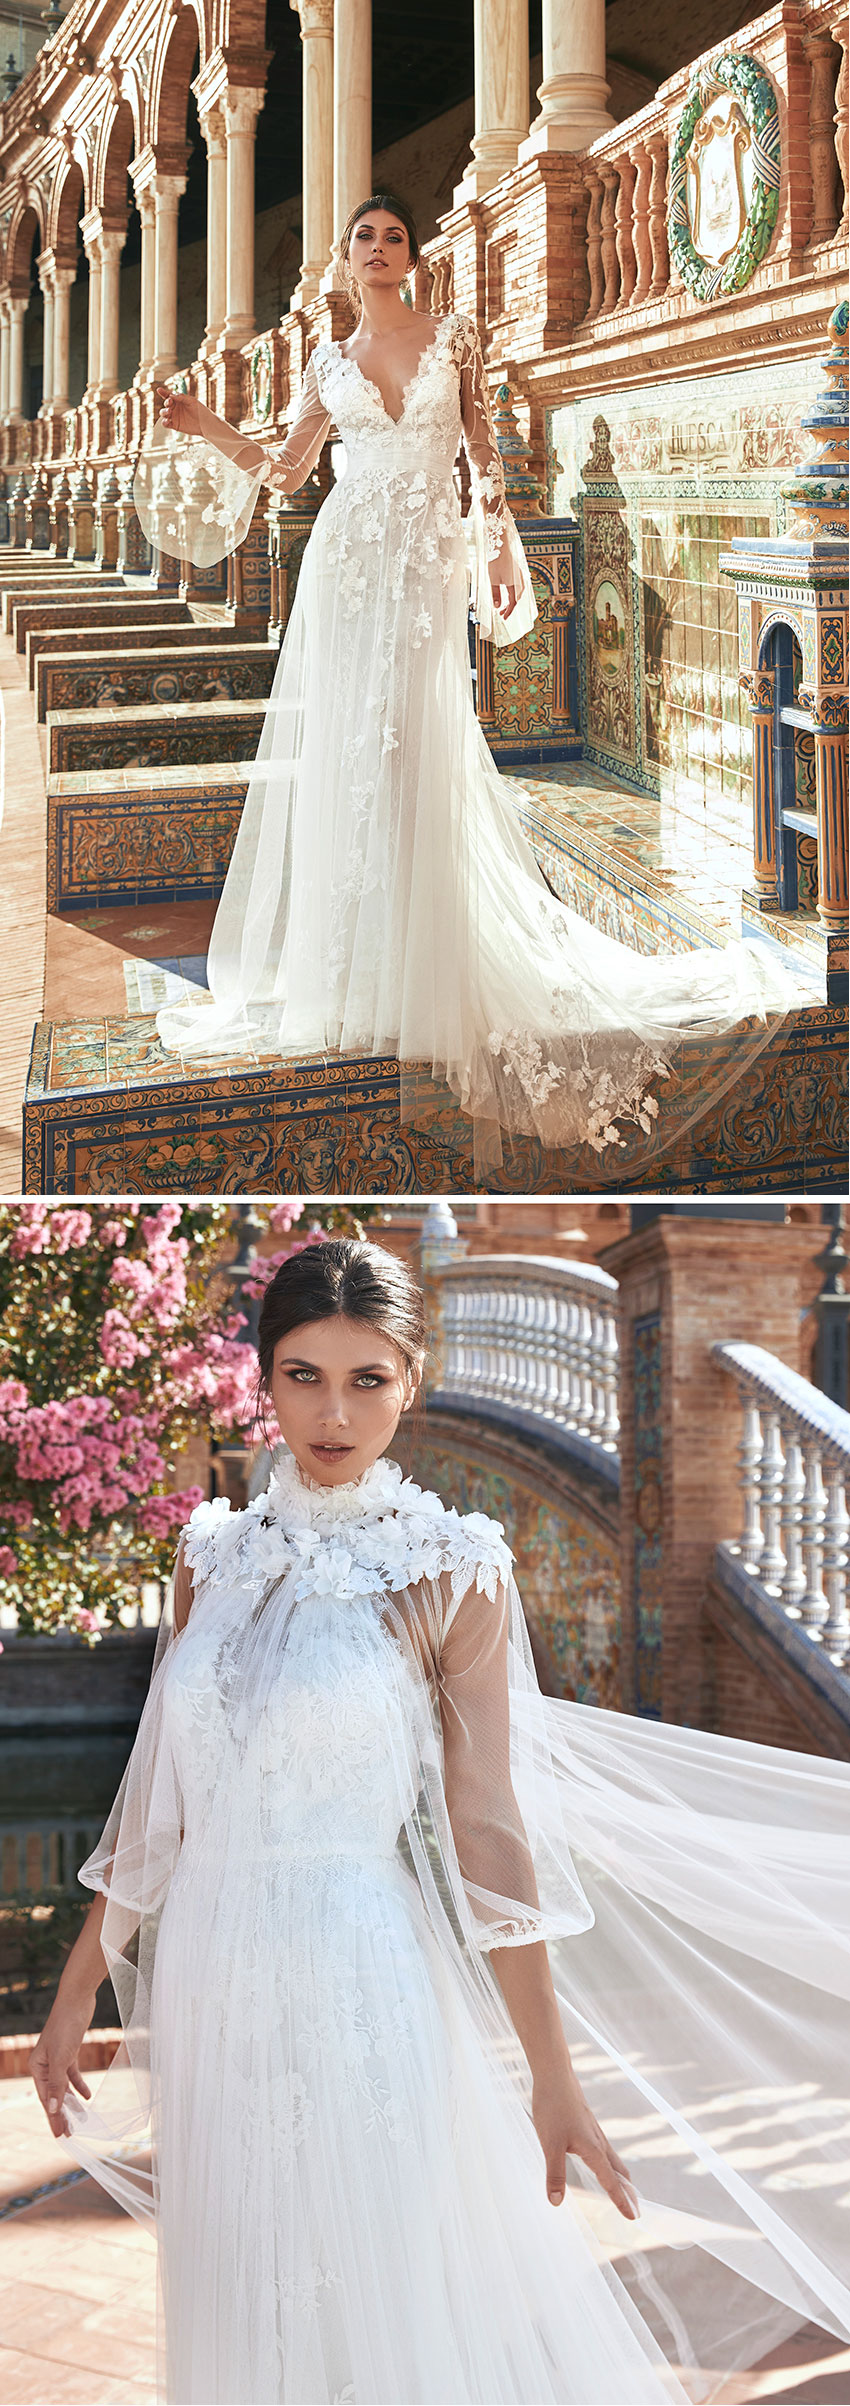 Marchesa for Pronovias bridal collection includes tulle and lace dresses Perfect Wedding Magazine